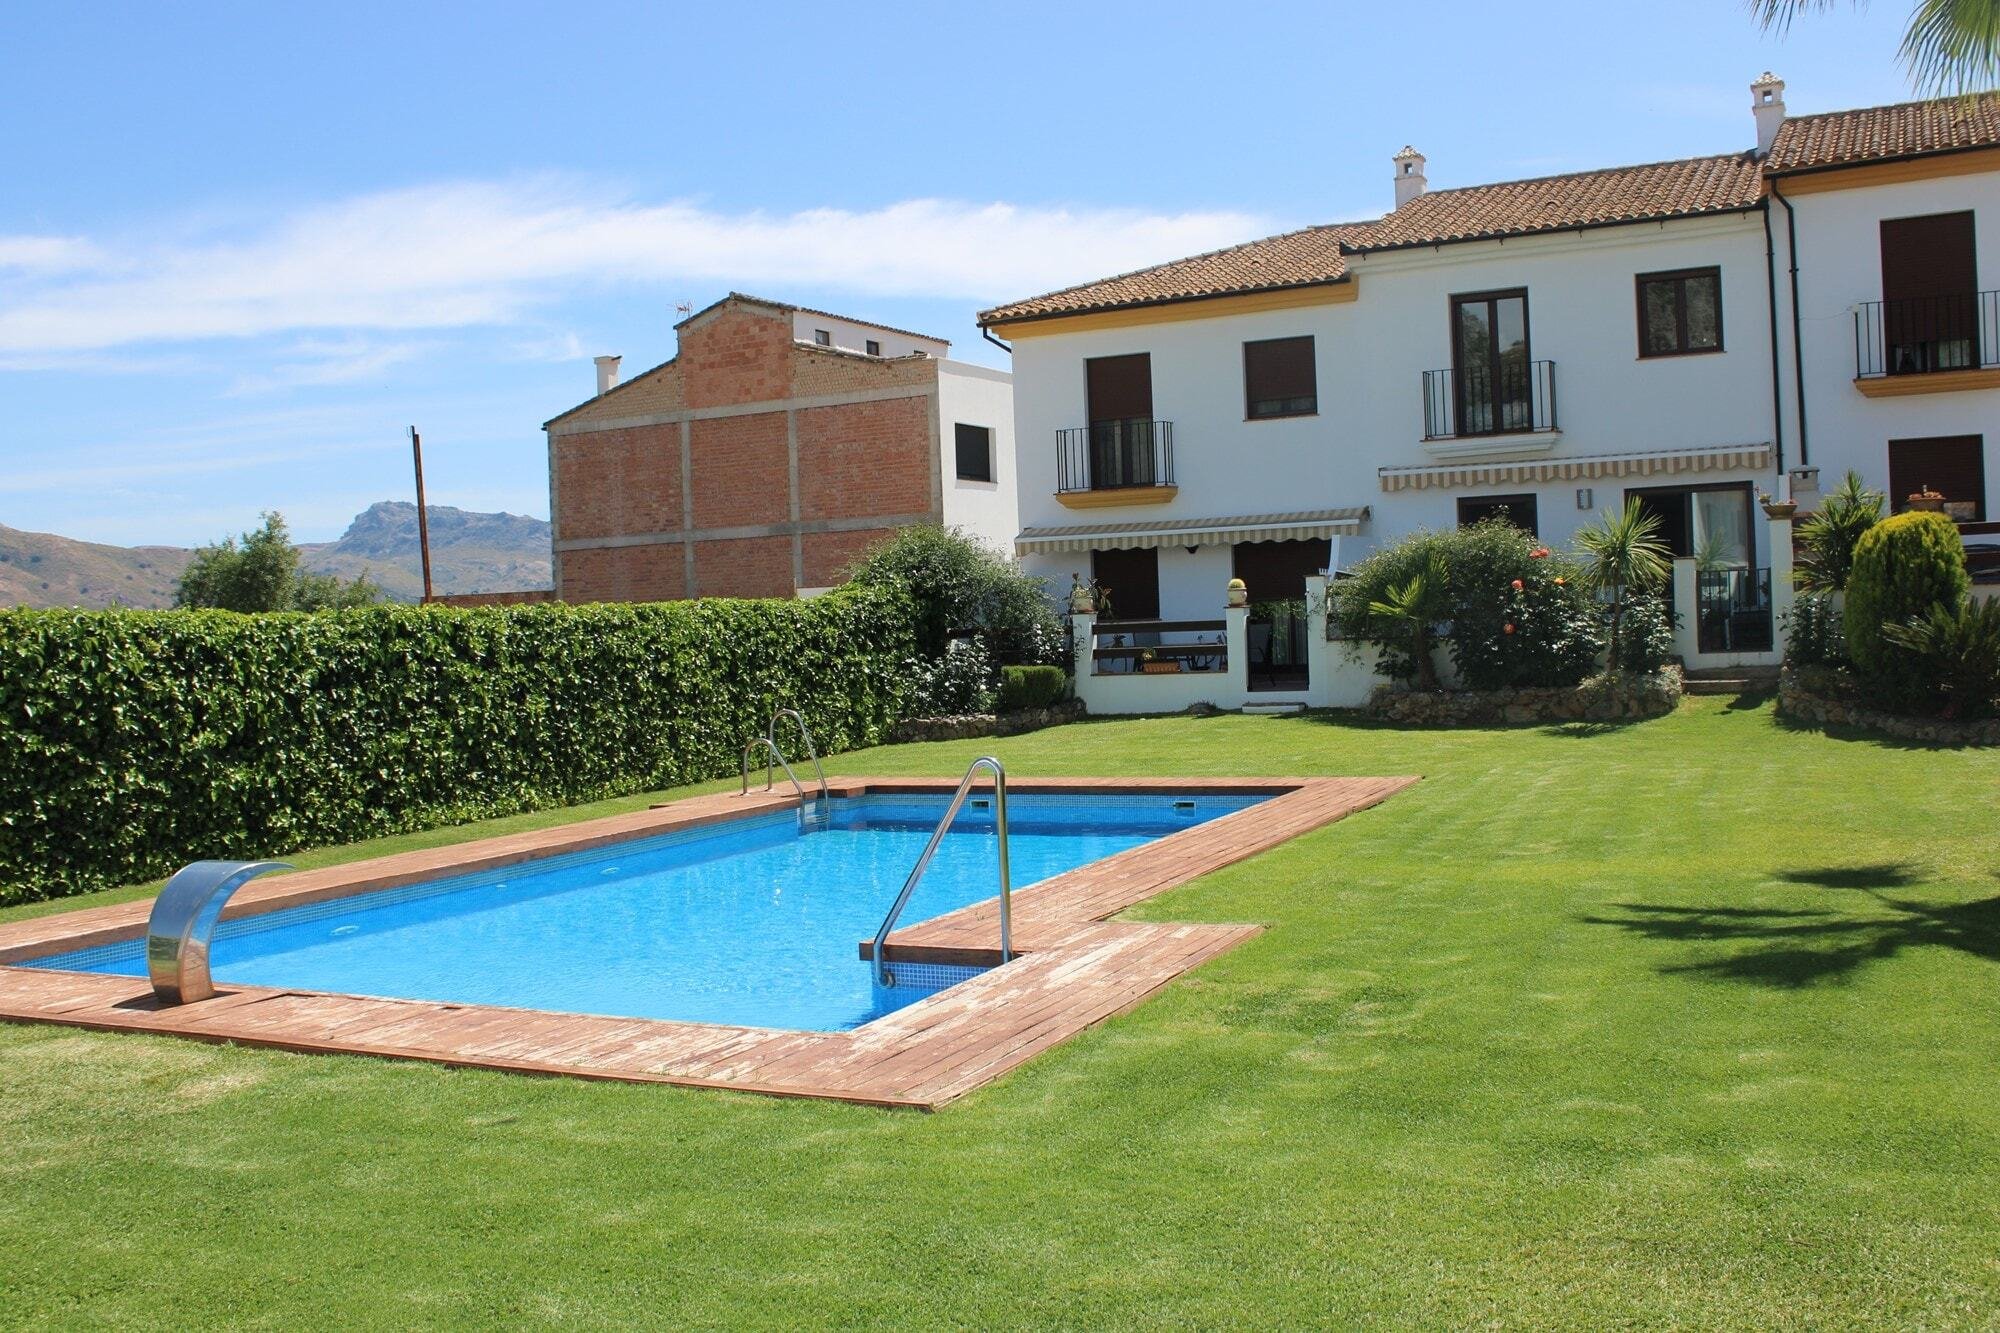 NEW HOUSE in gated community with POOL - 150,000€